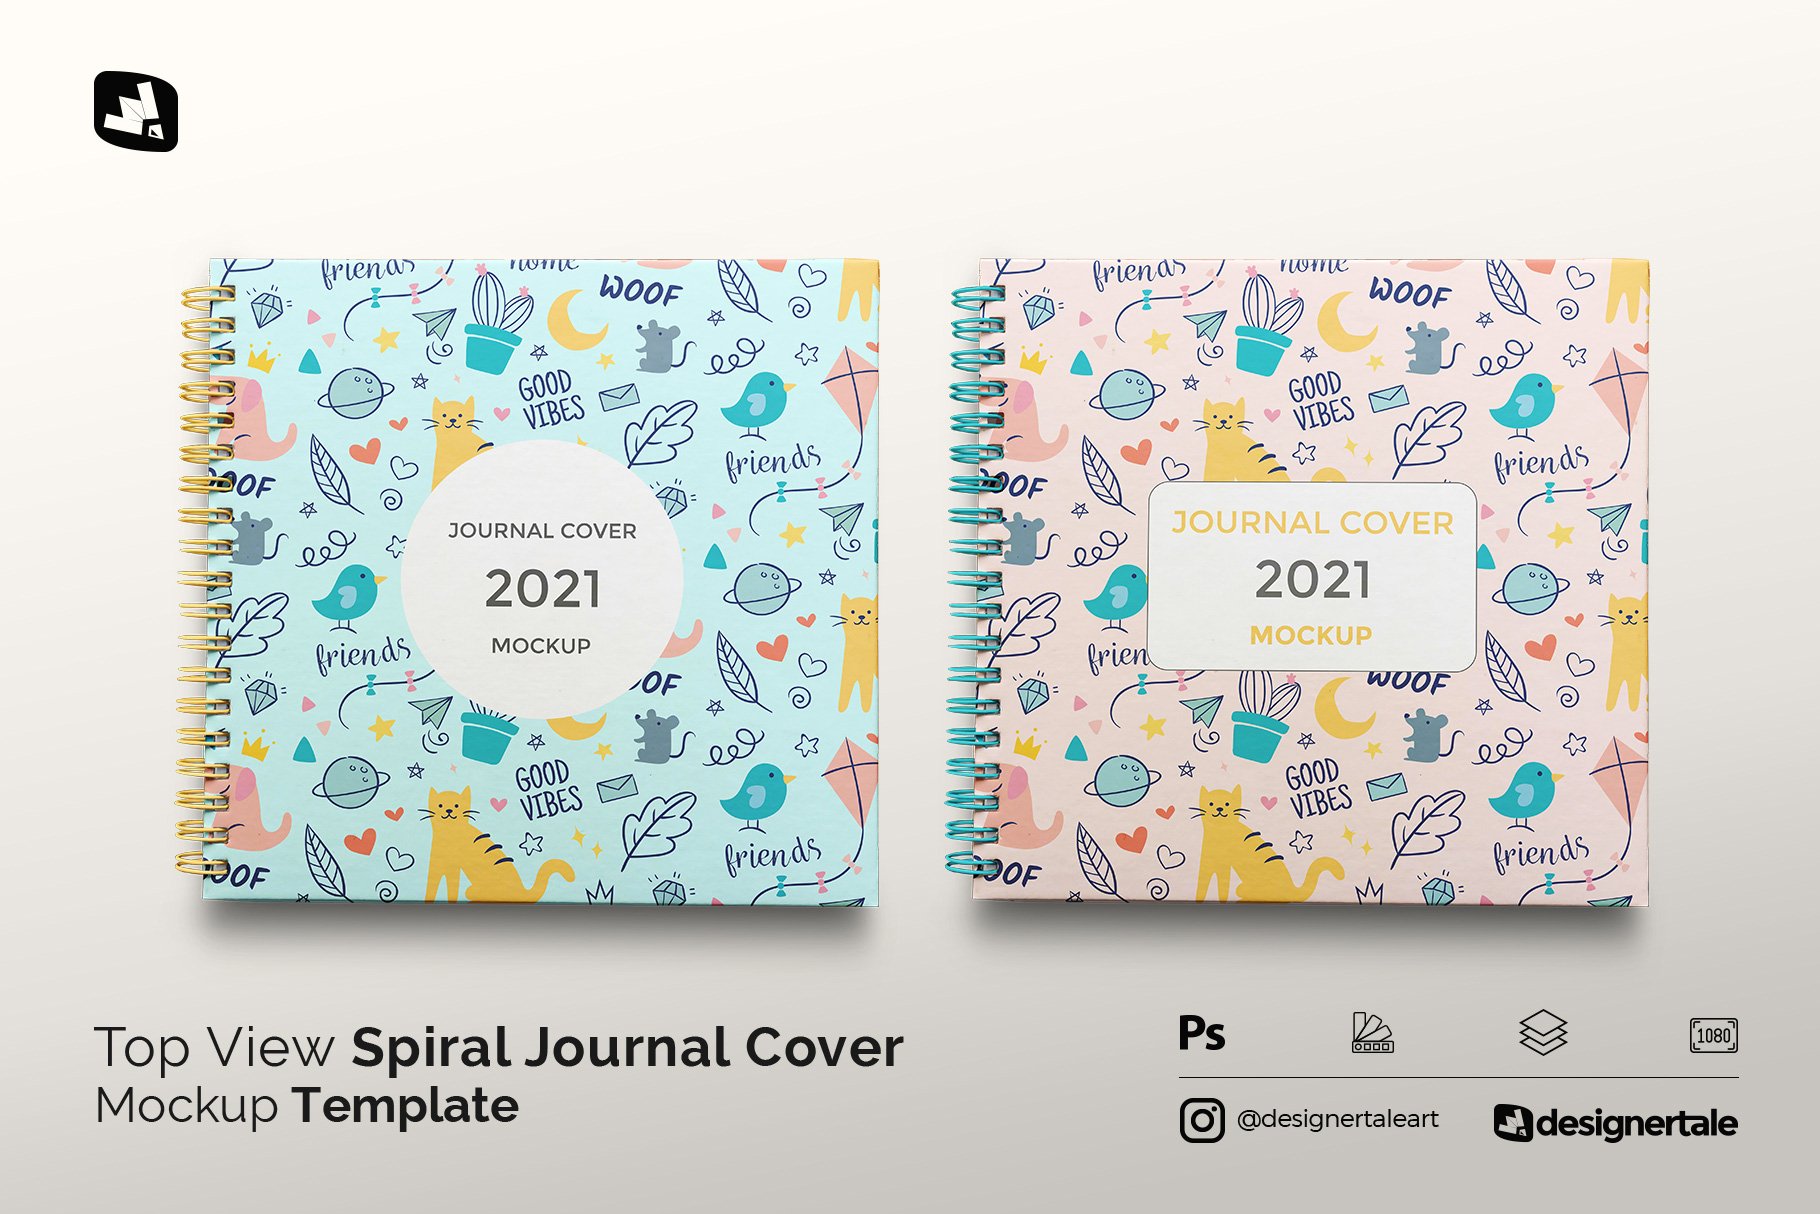 Top View Spiral Journal Cover Mockup